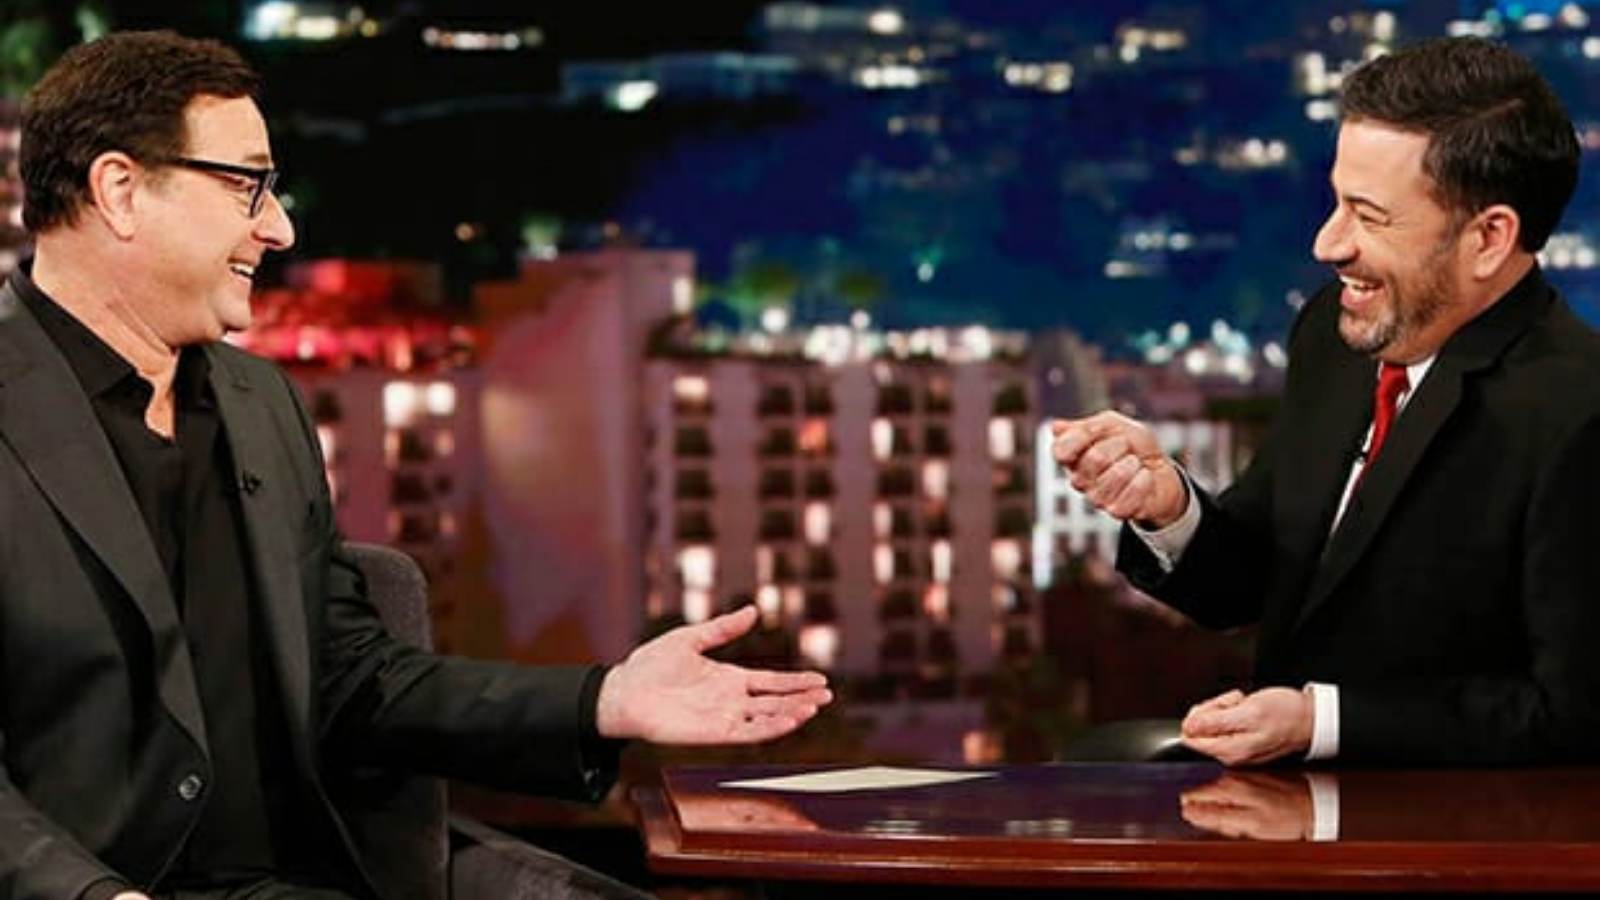 Saget and Kimmel in his show previously